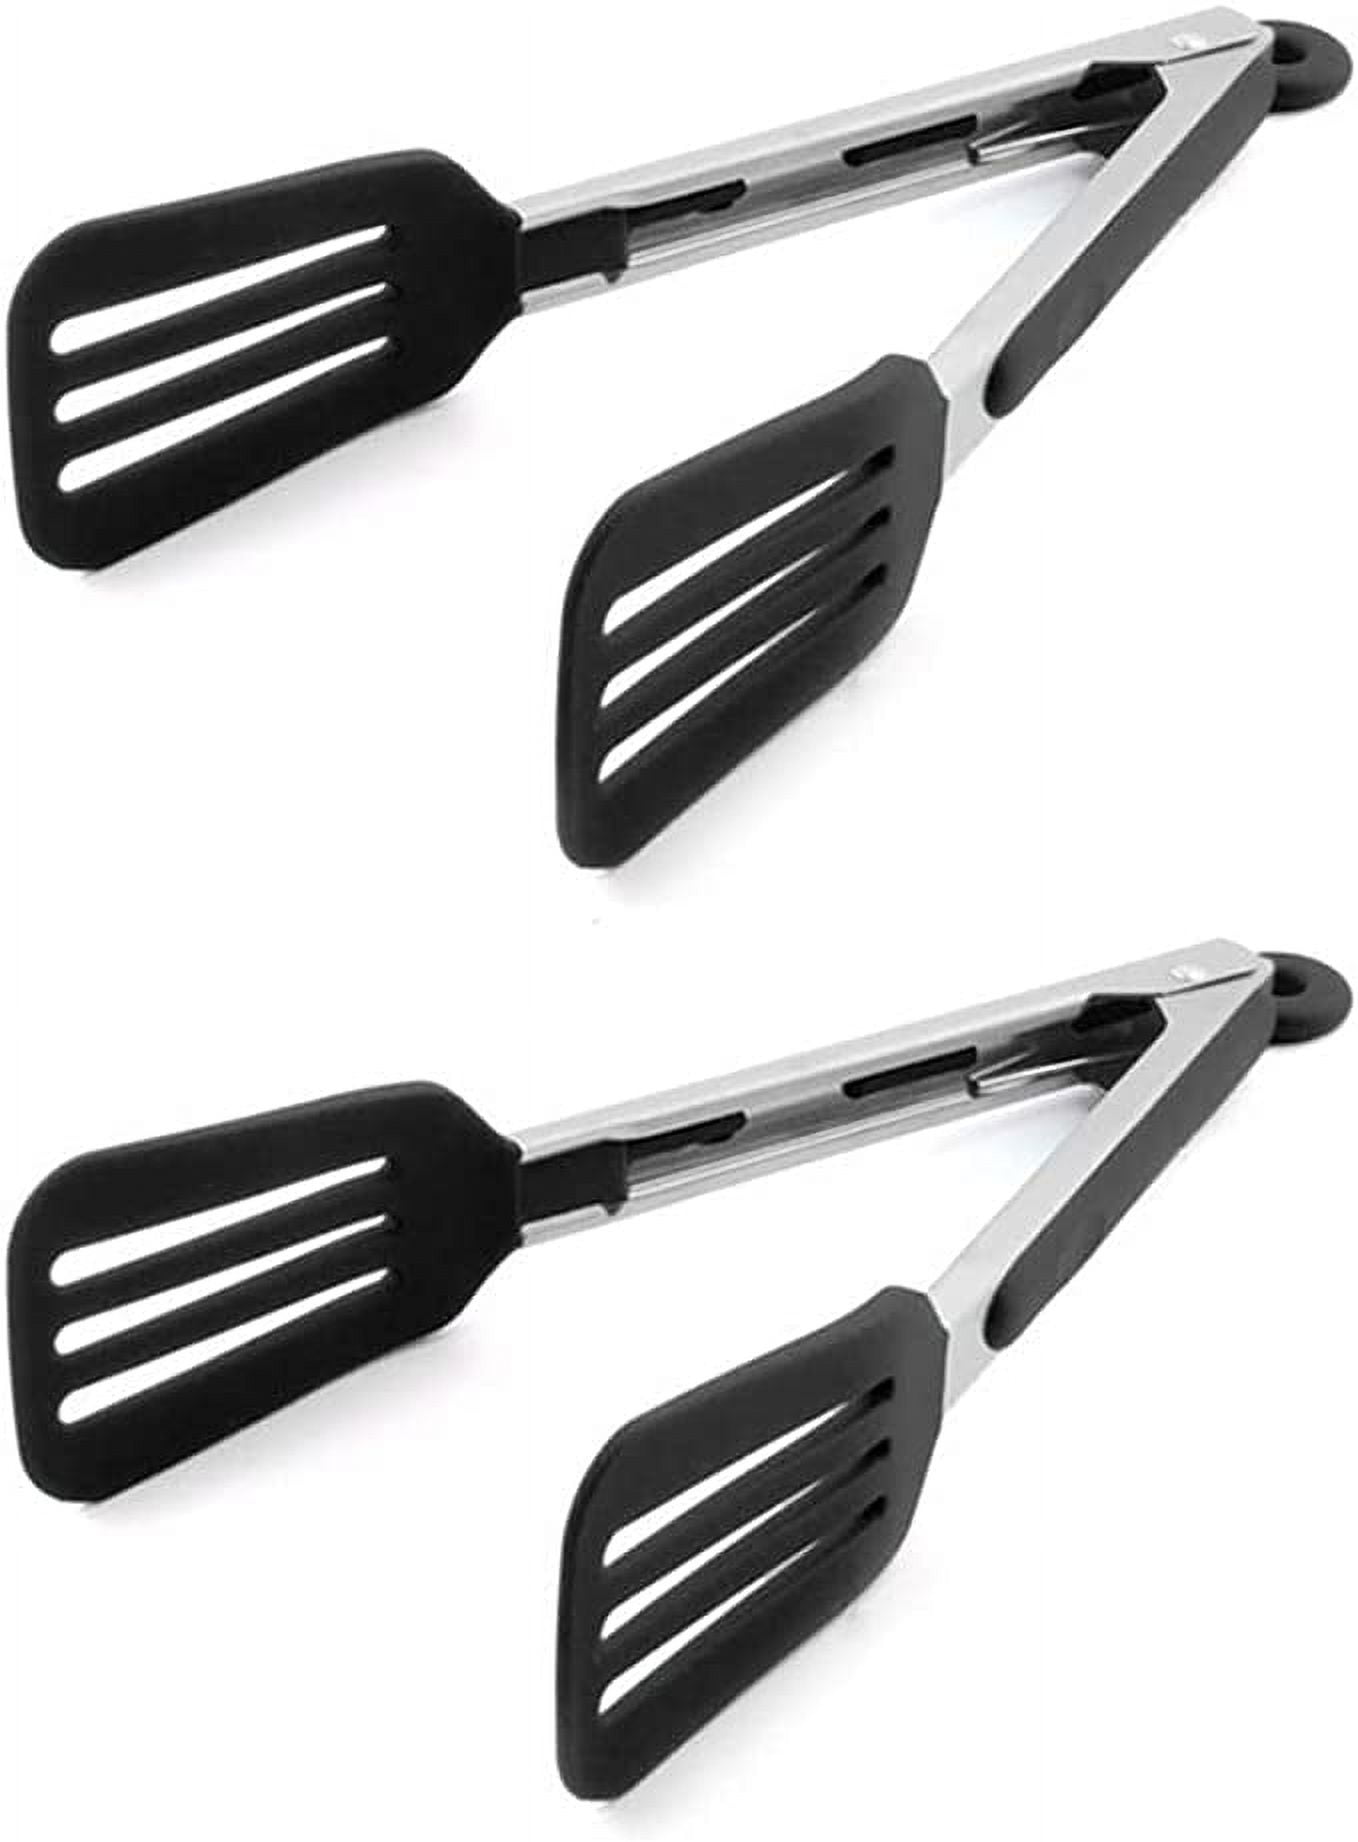 PerHomeAid Silicone Cooking Tongs,Kitchen Food Tongs, 16 inch Heavy Duty Non-STI